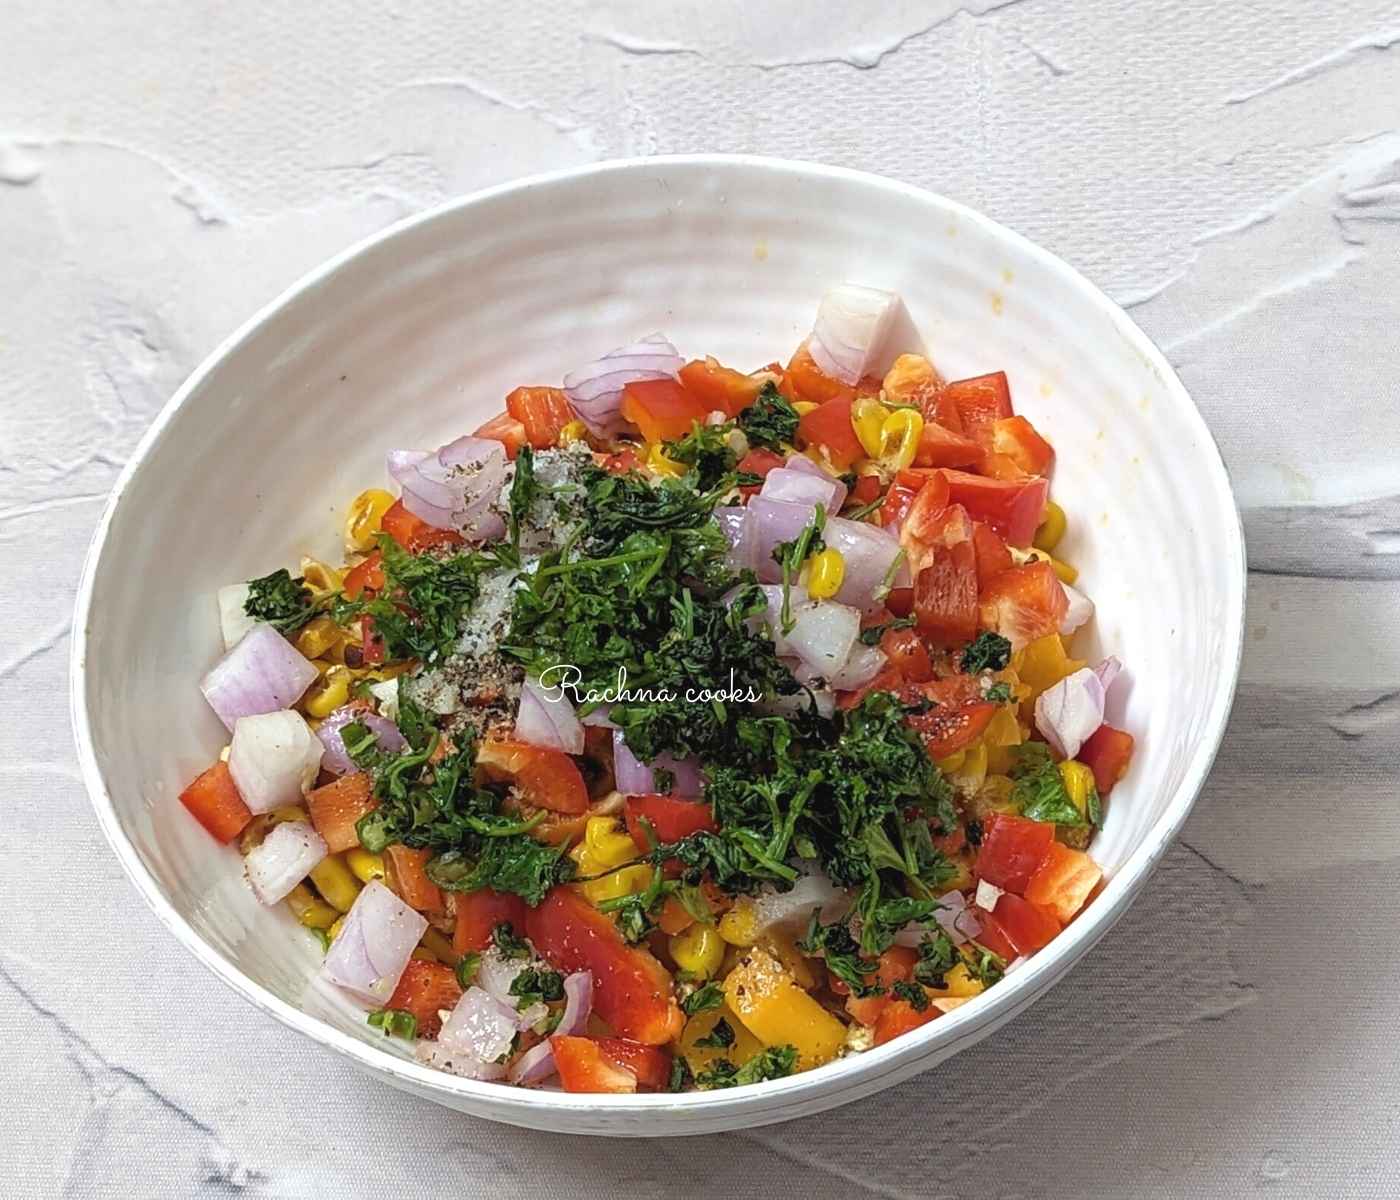 Cilantro leaves added to mango, corn, pepper, onion, chilli and seasonings in a bowl